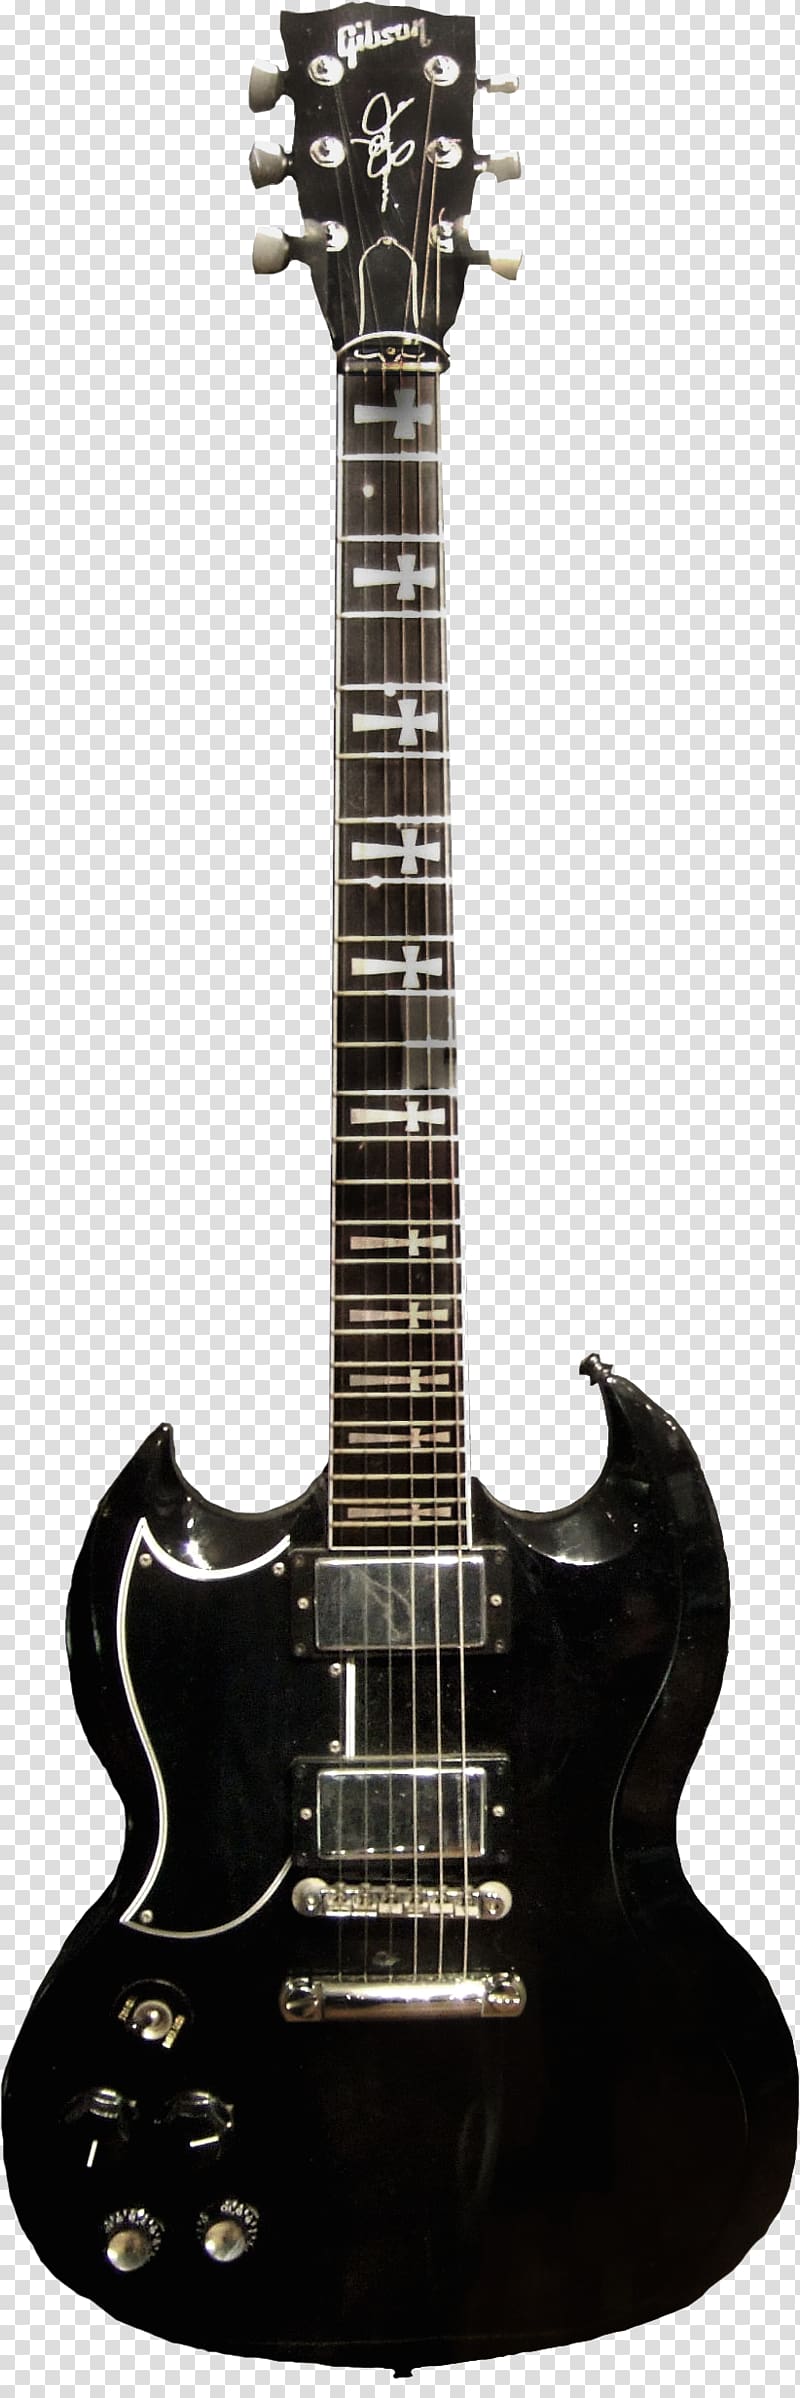 Gibson SG Special Gibson Les Paul Custom Guitar Gibson Brands, Inc., guitar transparent background PNG clipart